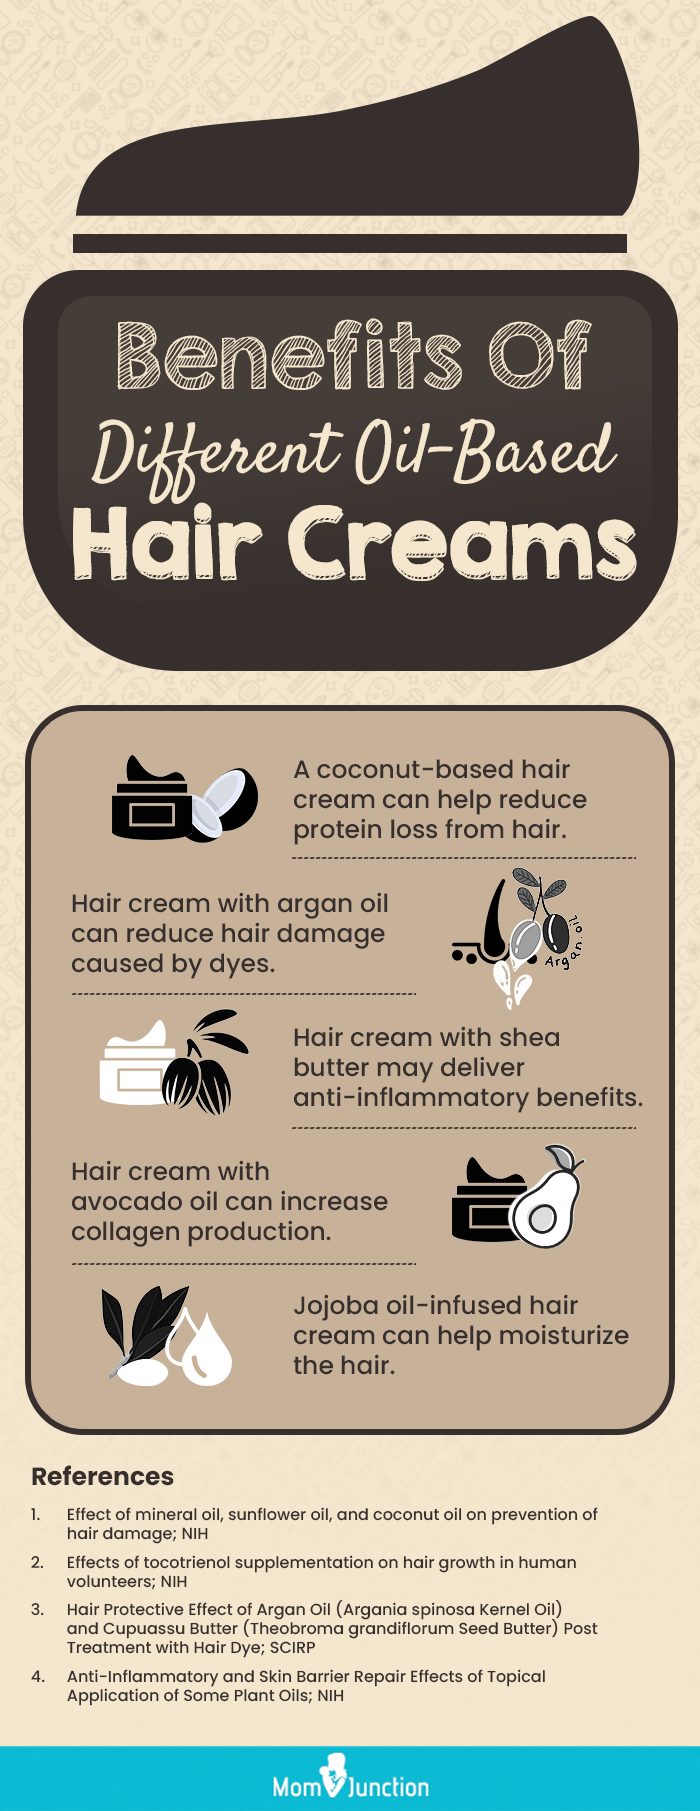 Hair Smoothing Cream: How To Use, Benefits & More